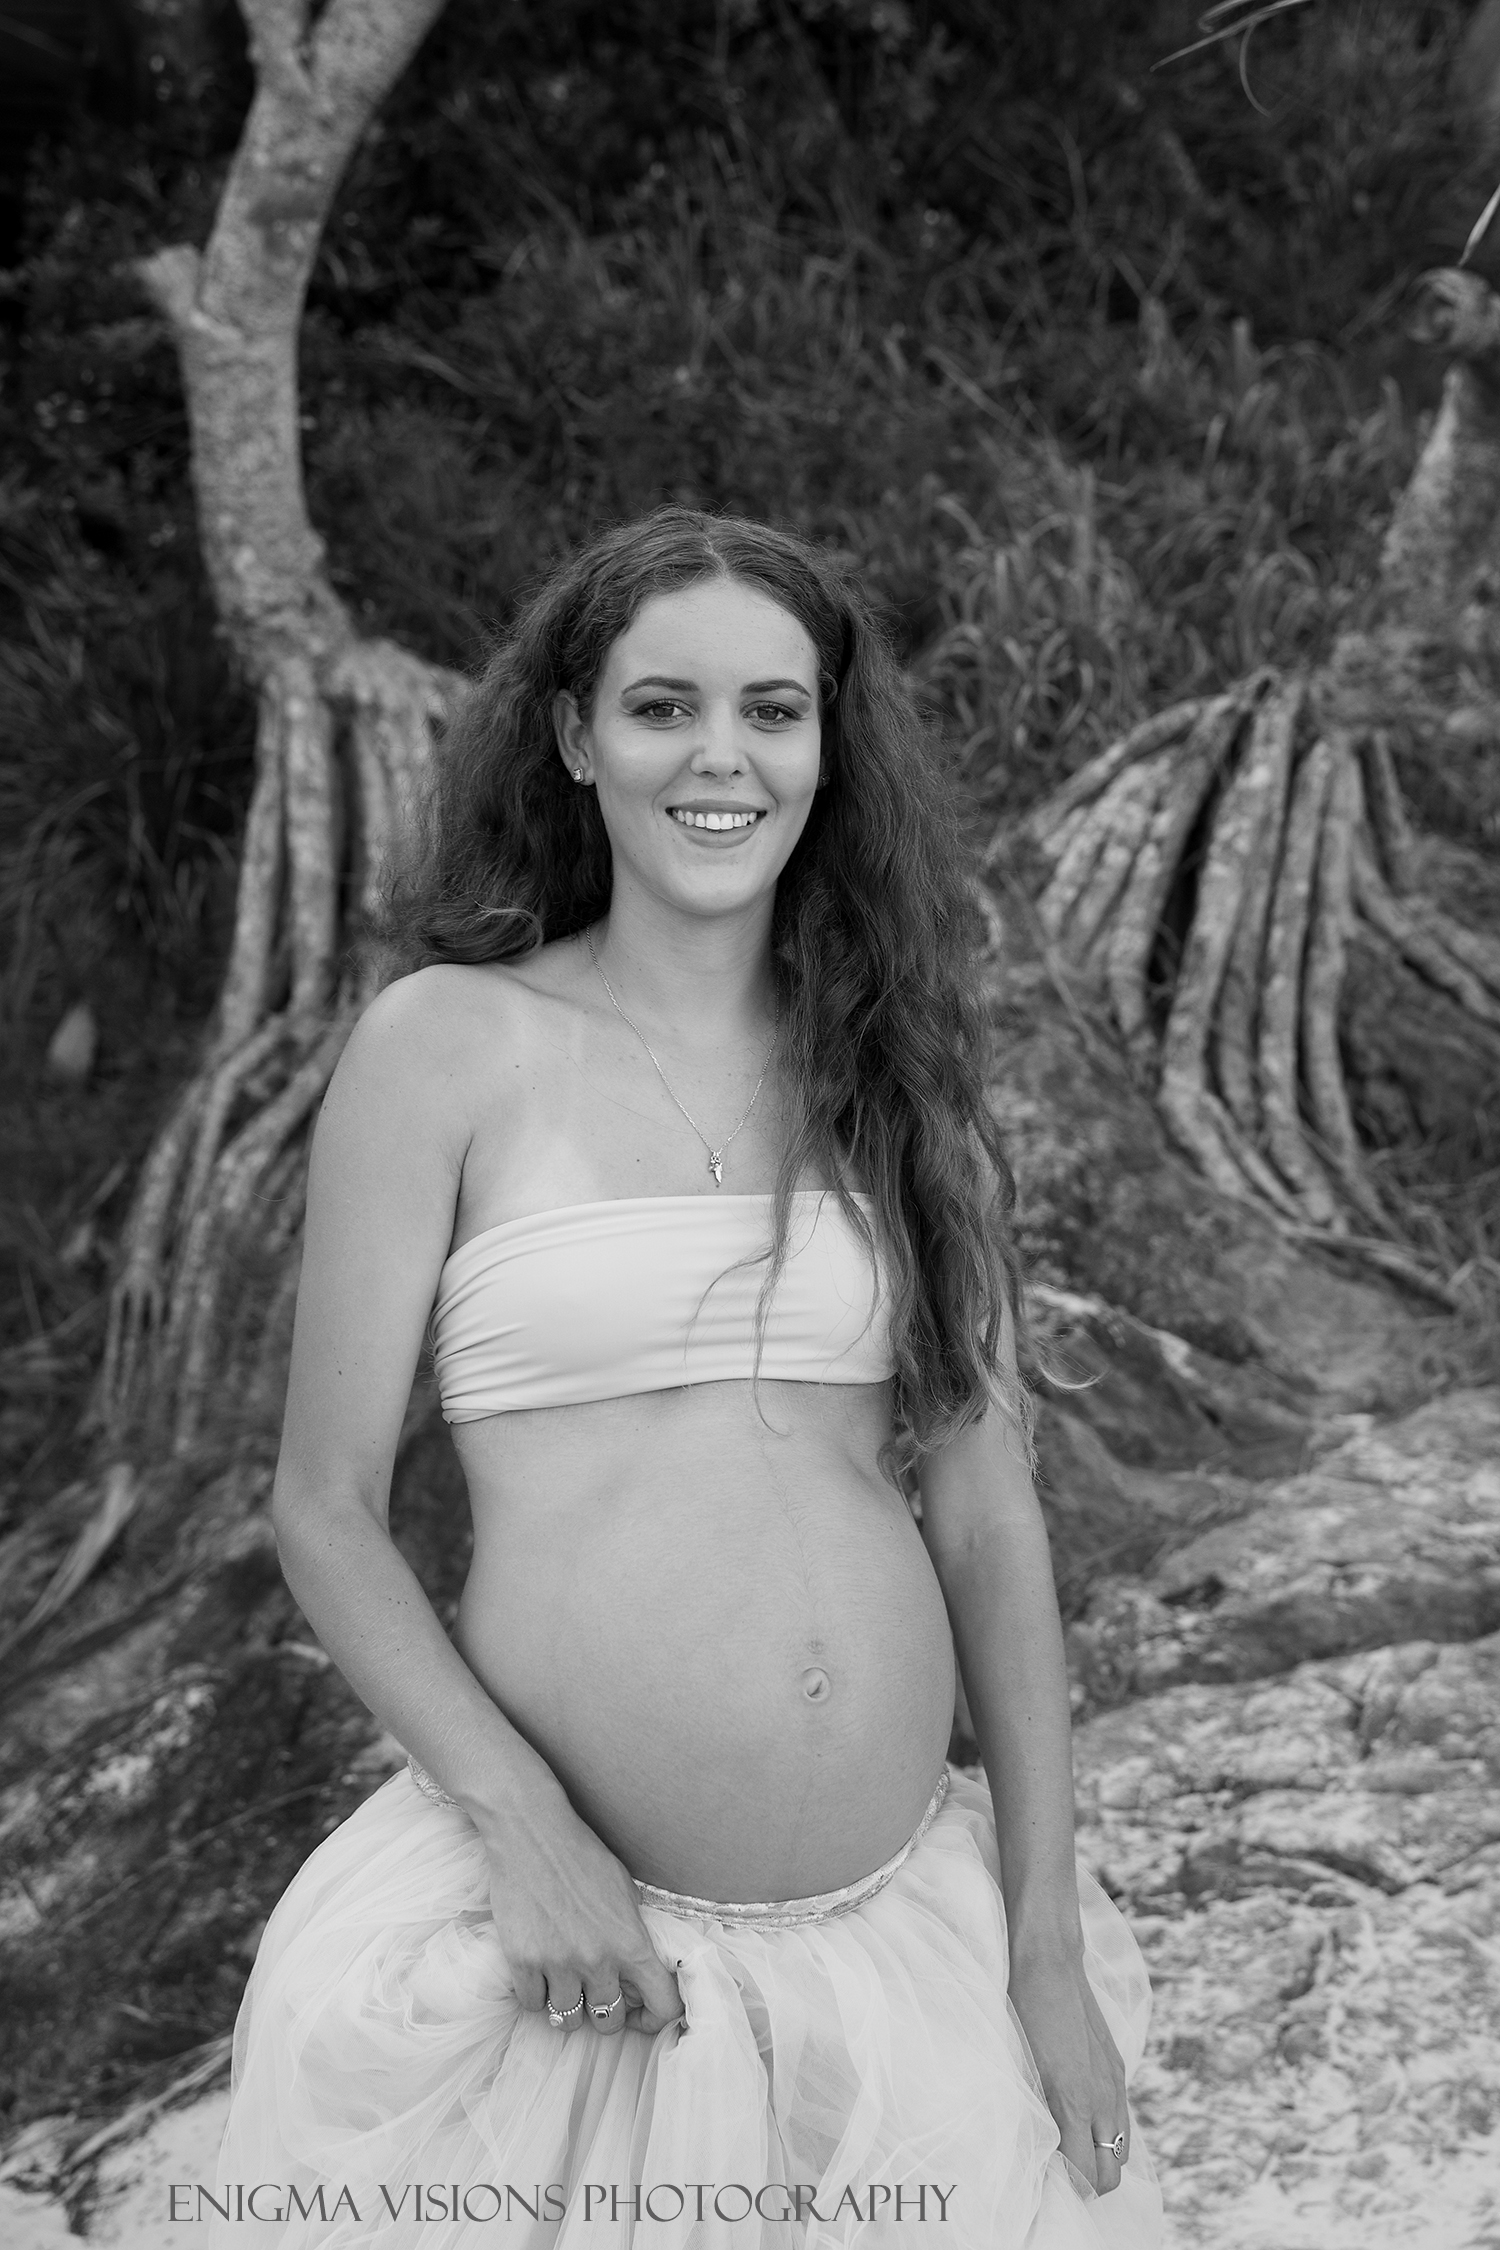 Enigma_Visions_Photography_Maternity_Mahlea019.jpg